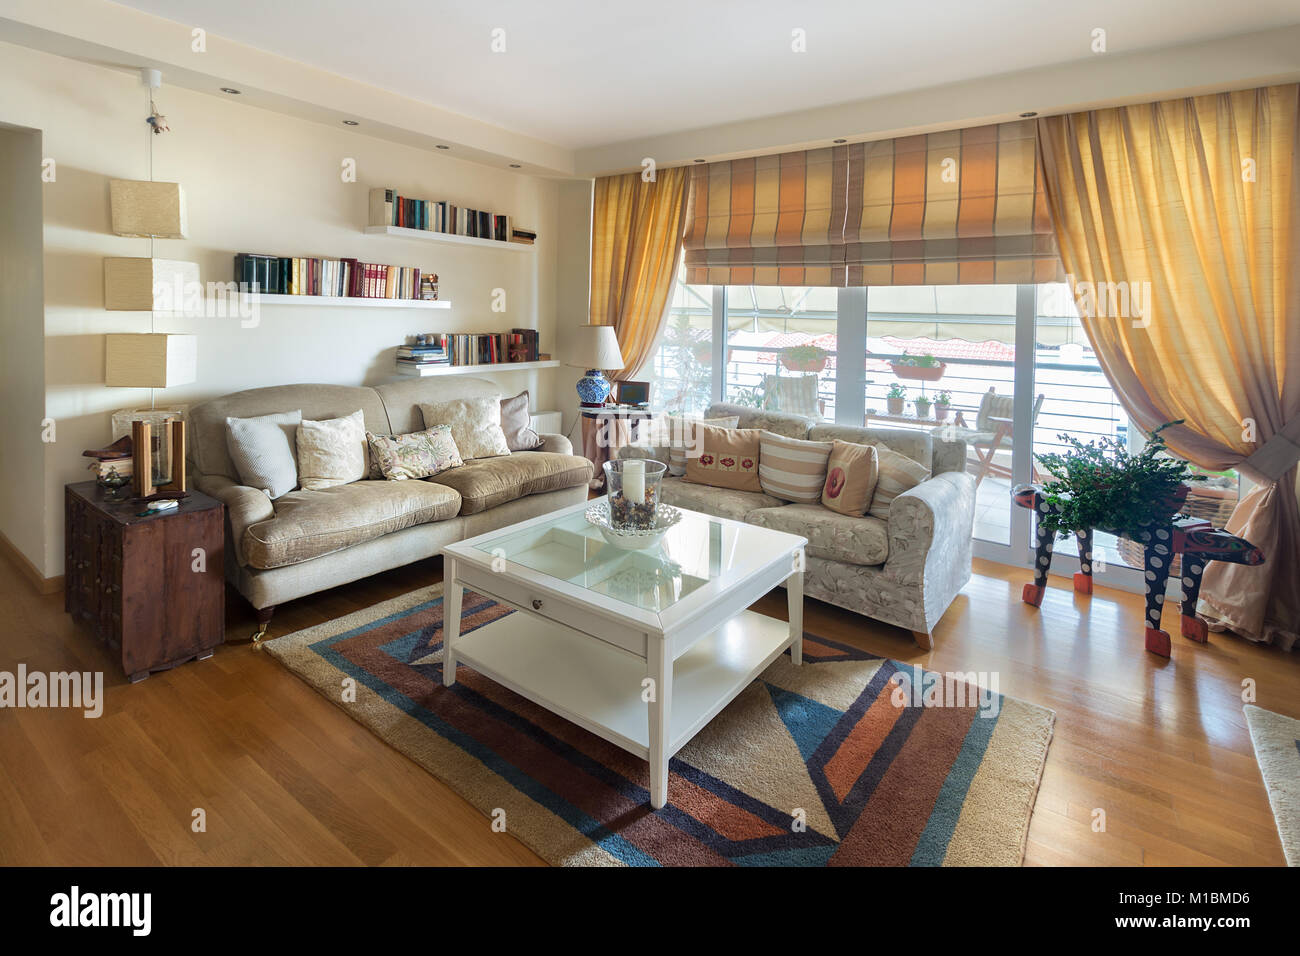 A large living room warm contemporary style with two sofas of two seaters, lamps, coffee table, carpet and stands on the wall with books. The floor is Stock Photo